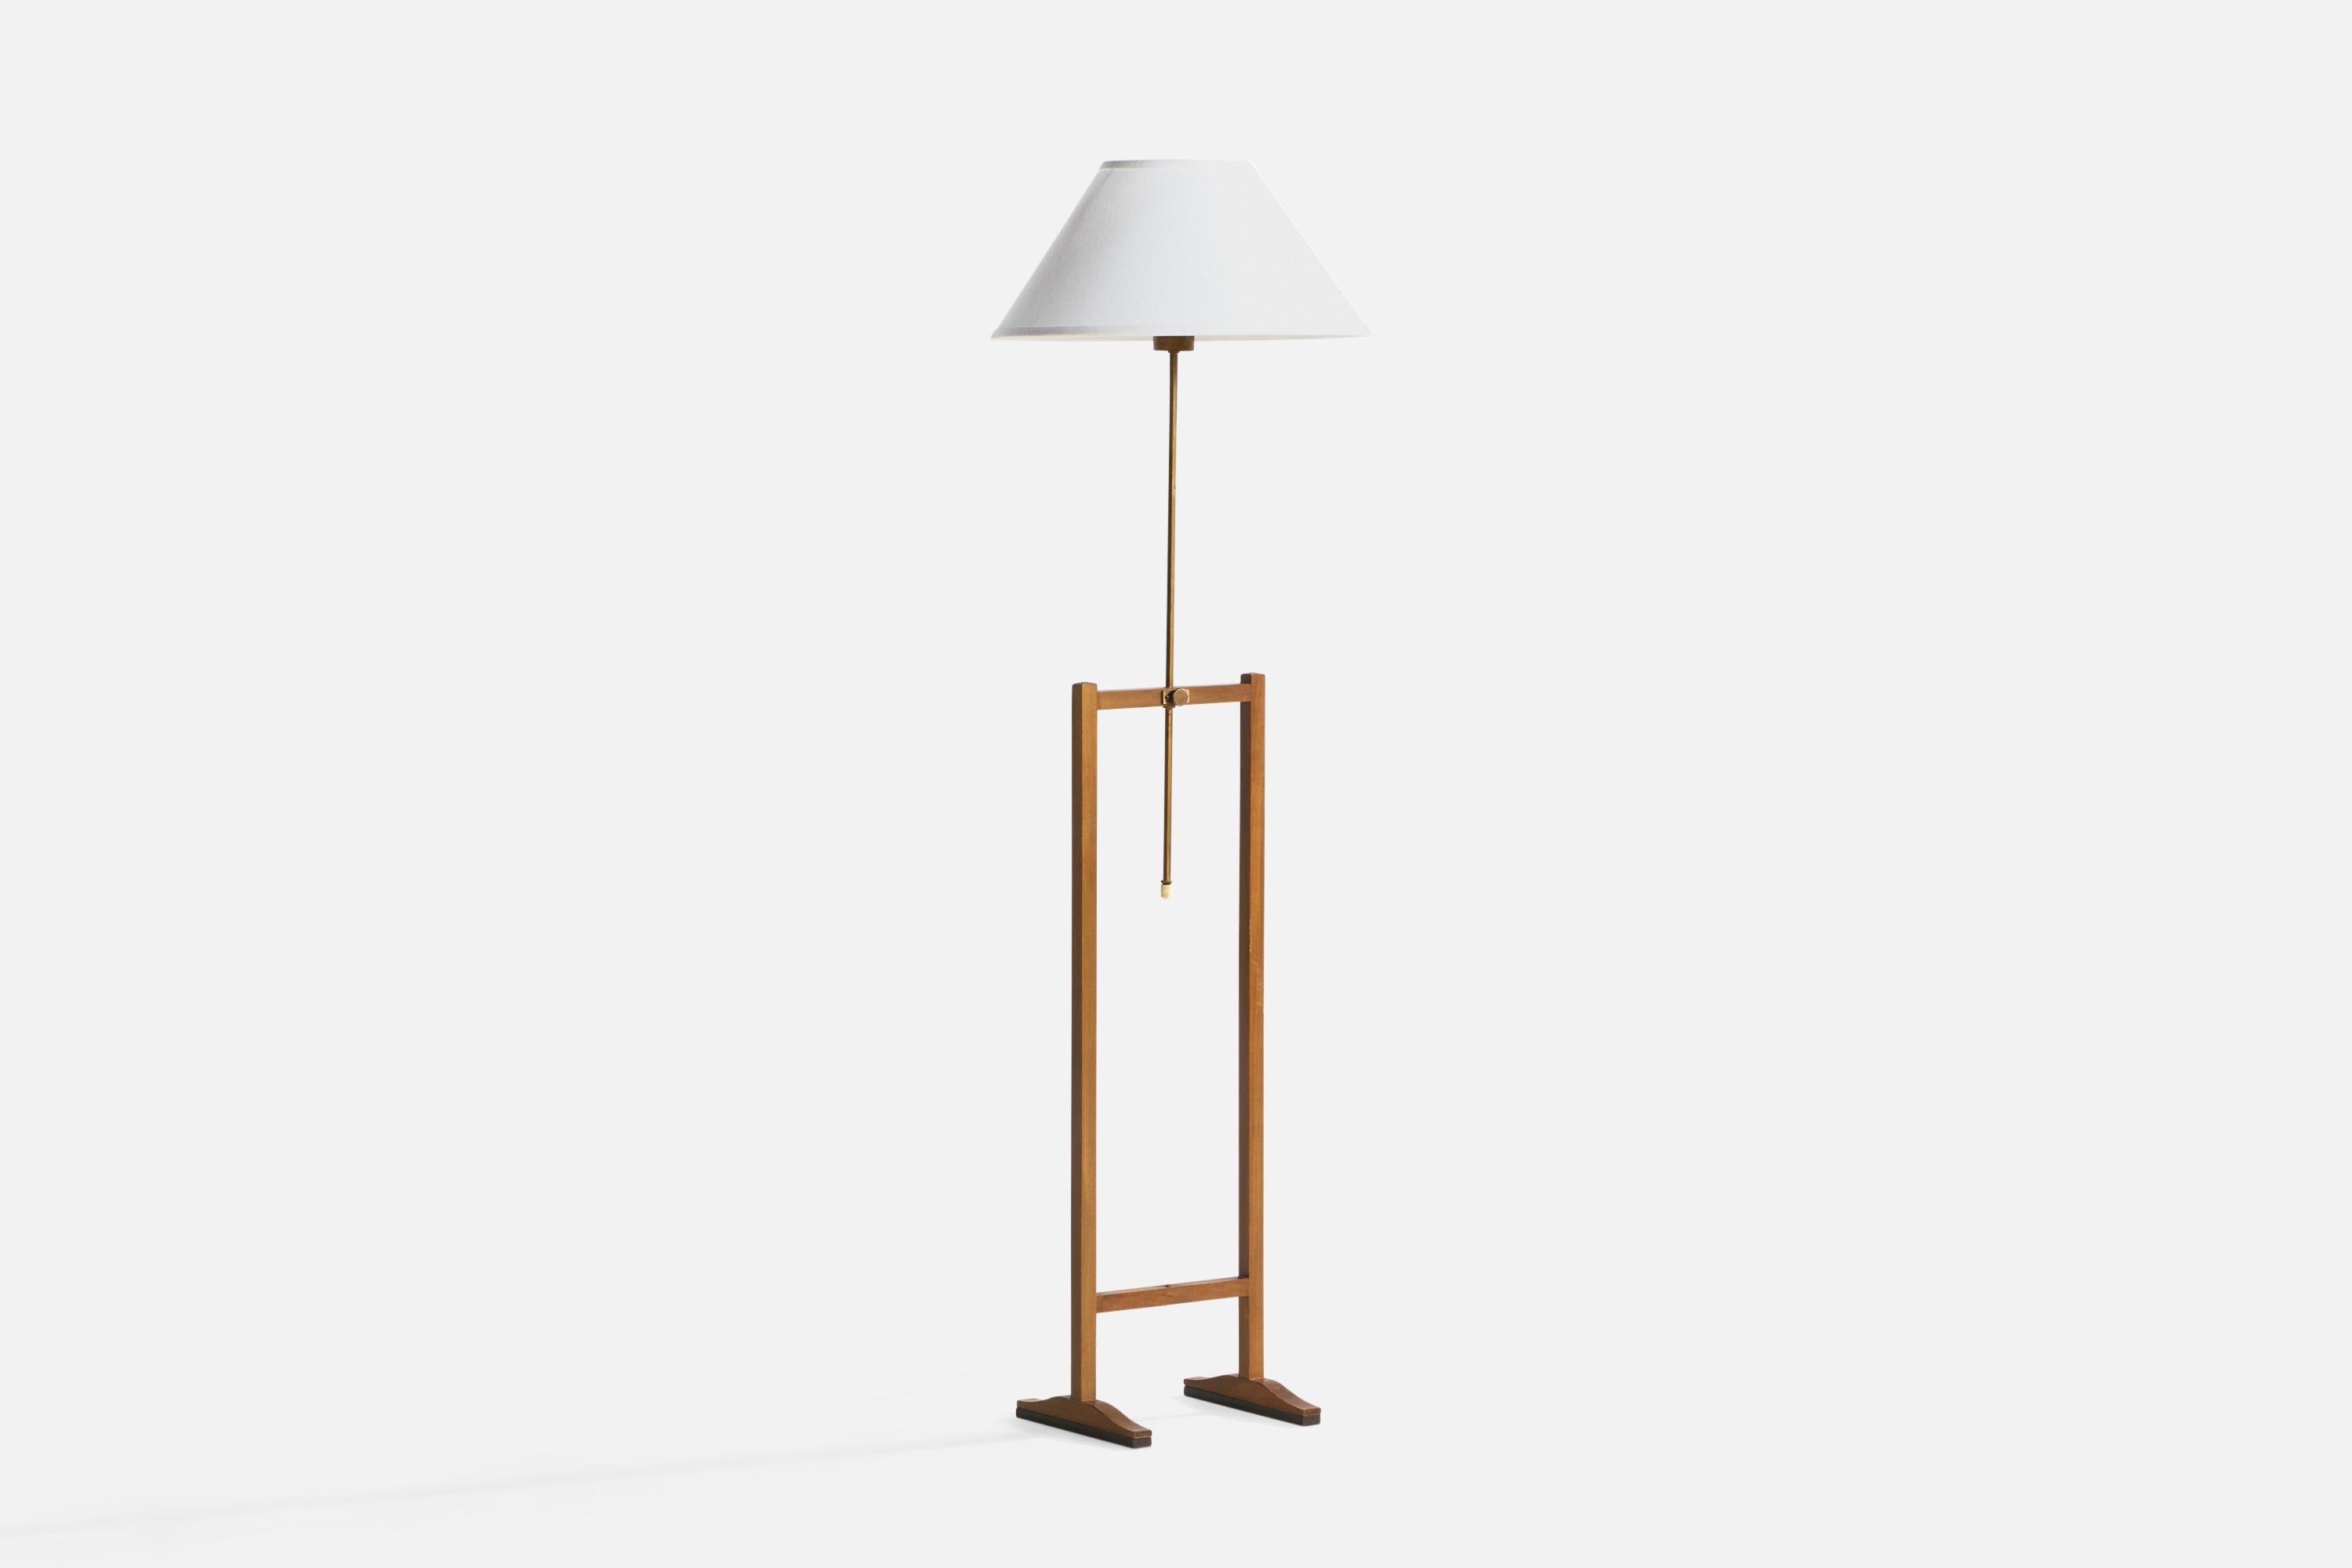 An adjustable brass, mahogany and white fabric floor lamp designed by Josef Frank and produced by Svenskt Tenn,, Sweden, 1940s.

Cord feeds from bottom of brass stem.

Overall Dimensions (inches): 54.38” H x 16.25” Diameter. Stated dimensions